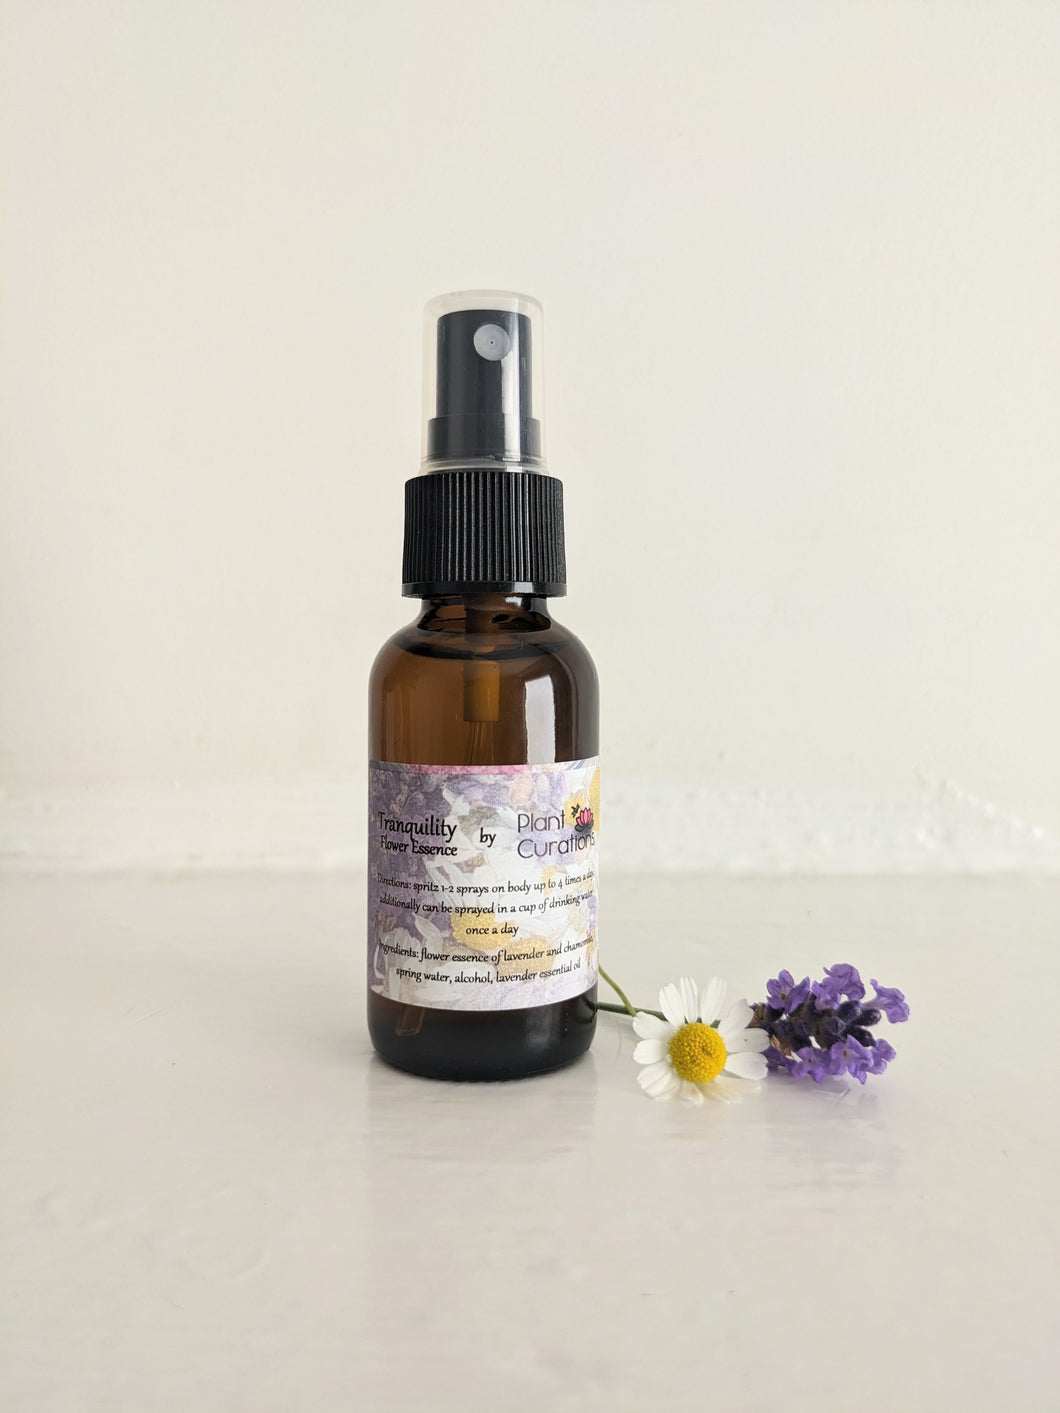 Tranquility flower essence